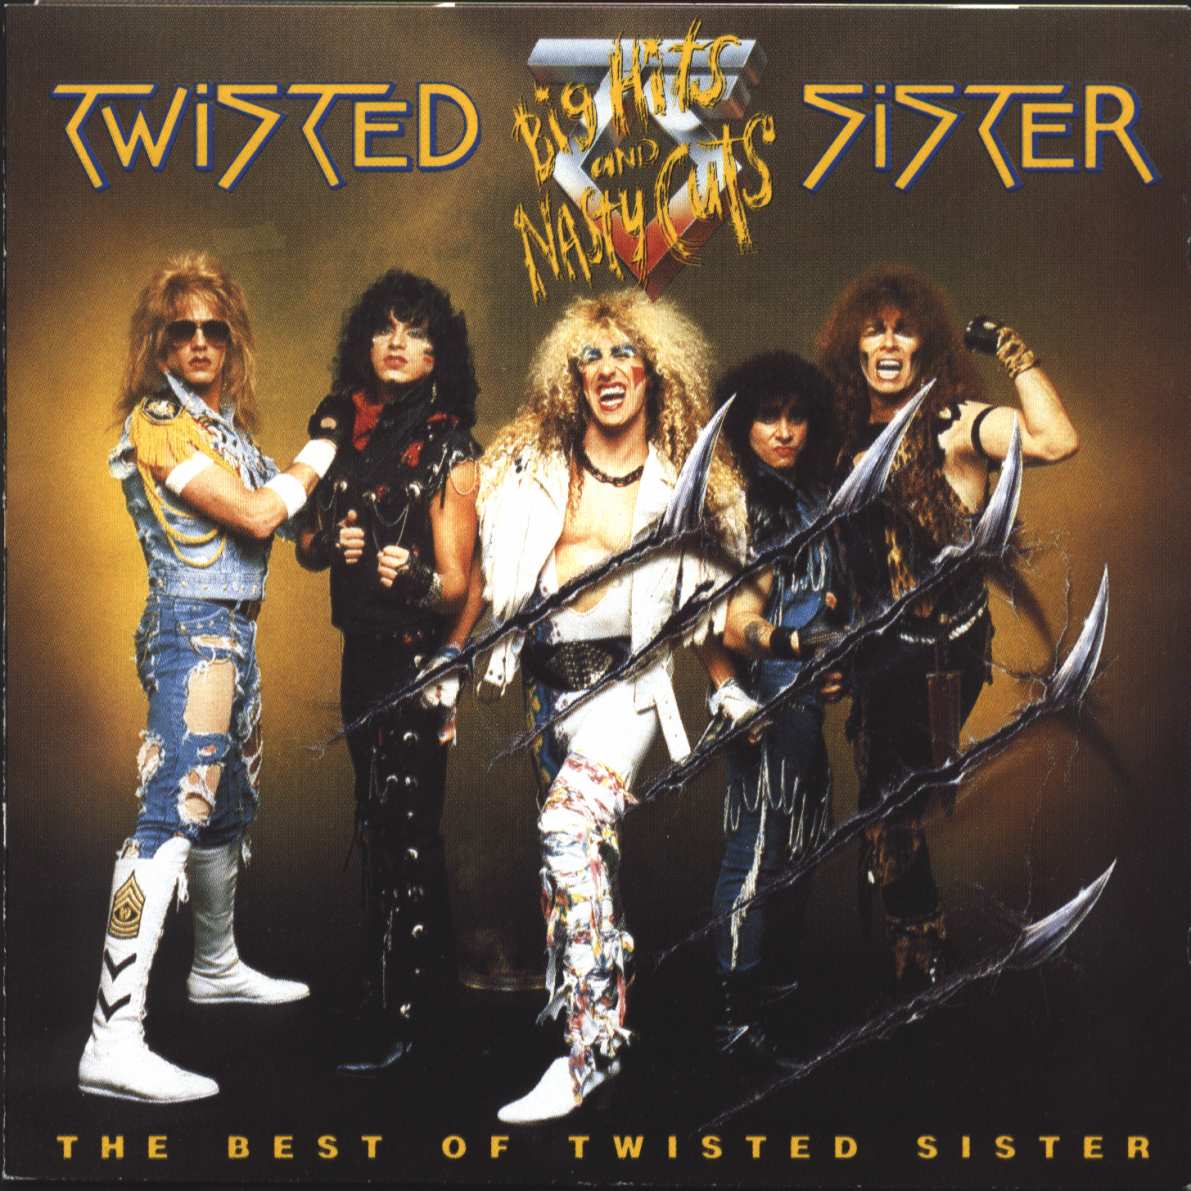 [Twisted+Sister+-+Big+Hits+And+Nasty+Cuts+(front).jpg]